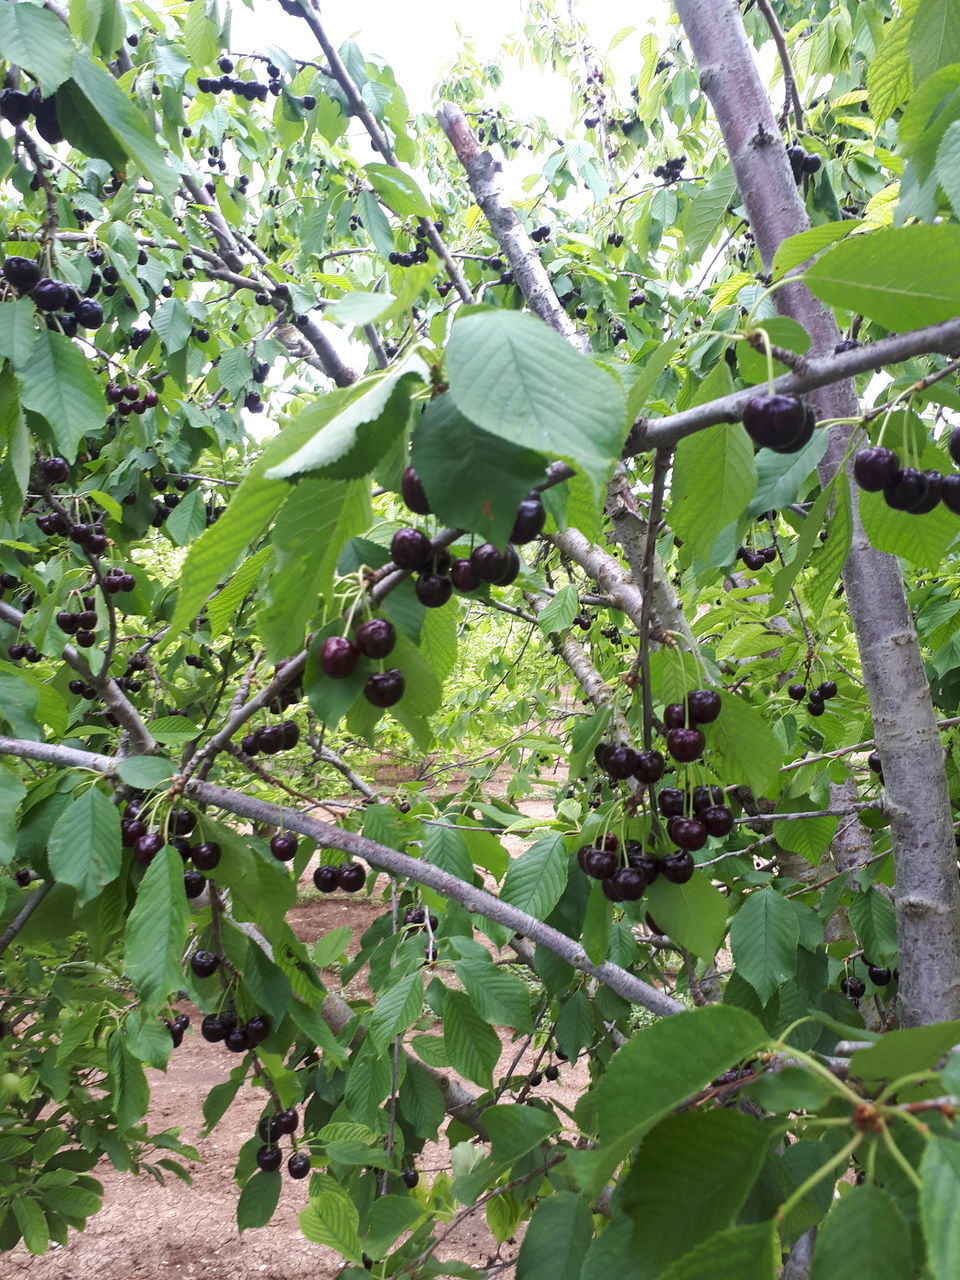 CLOSE-UP OF FRESH FRUITS GROWING ON TREE